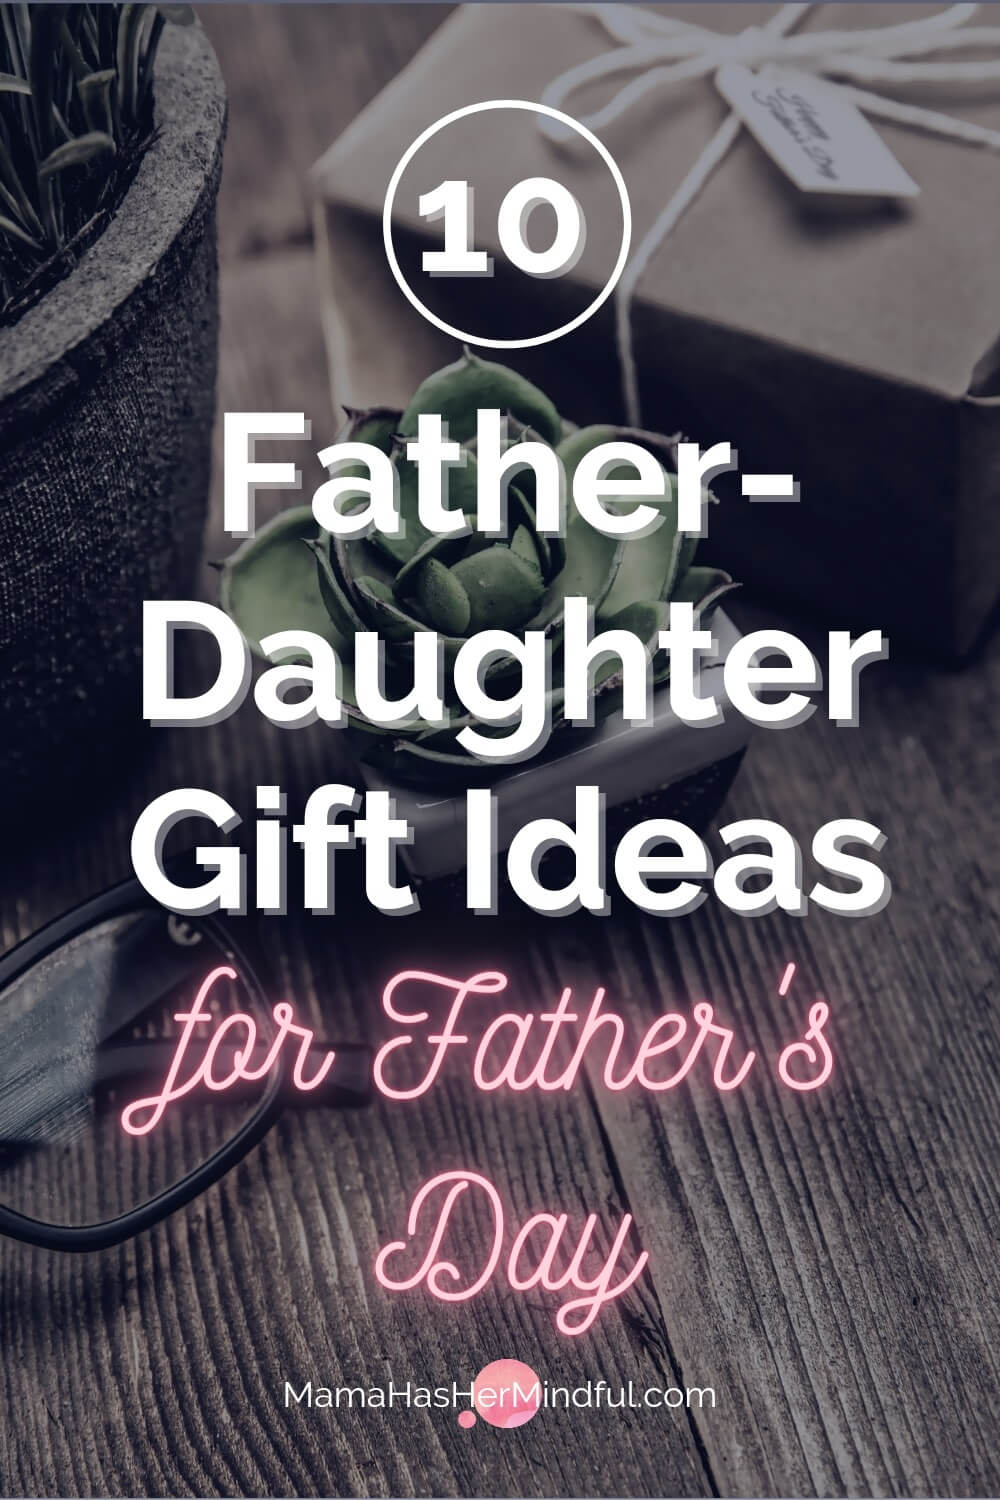 10 Thoughtful Father-Daughter Gift Ideas for Father’s Day